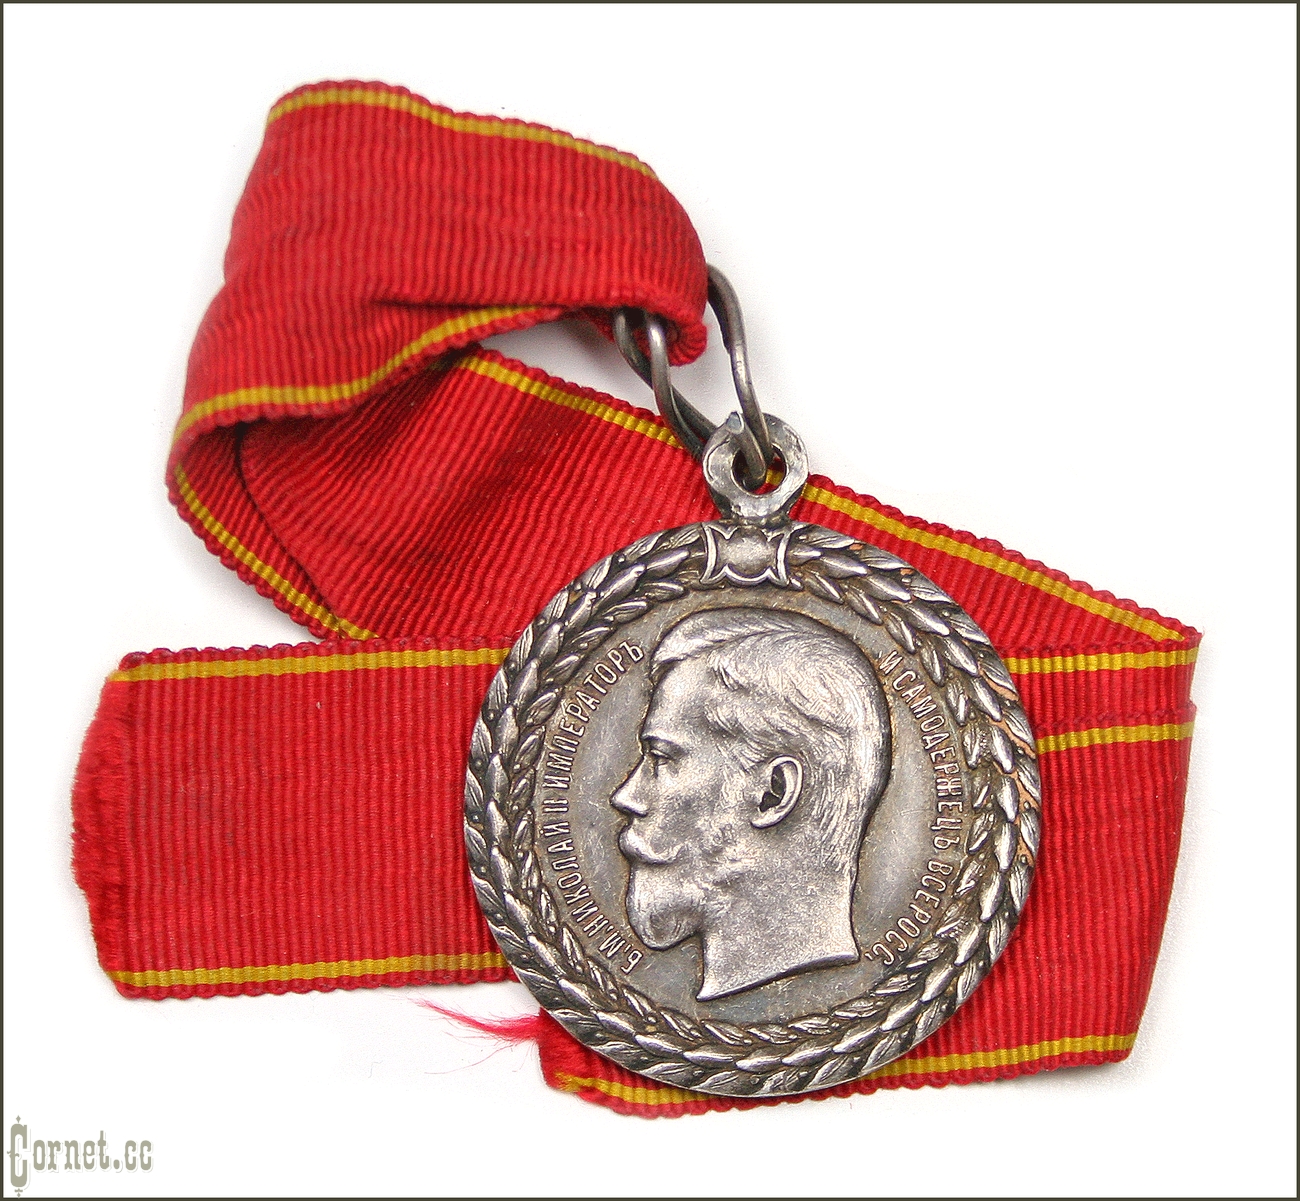 Medal "For free service in the Police" NII